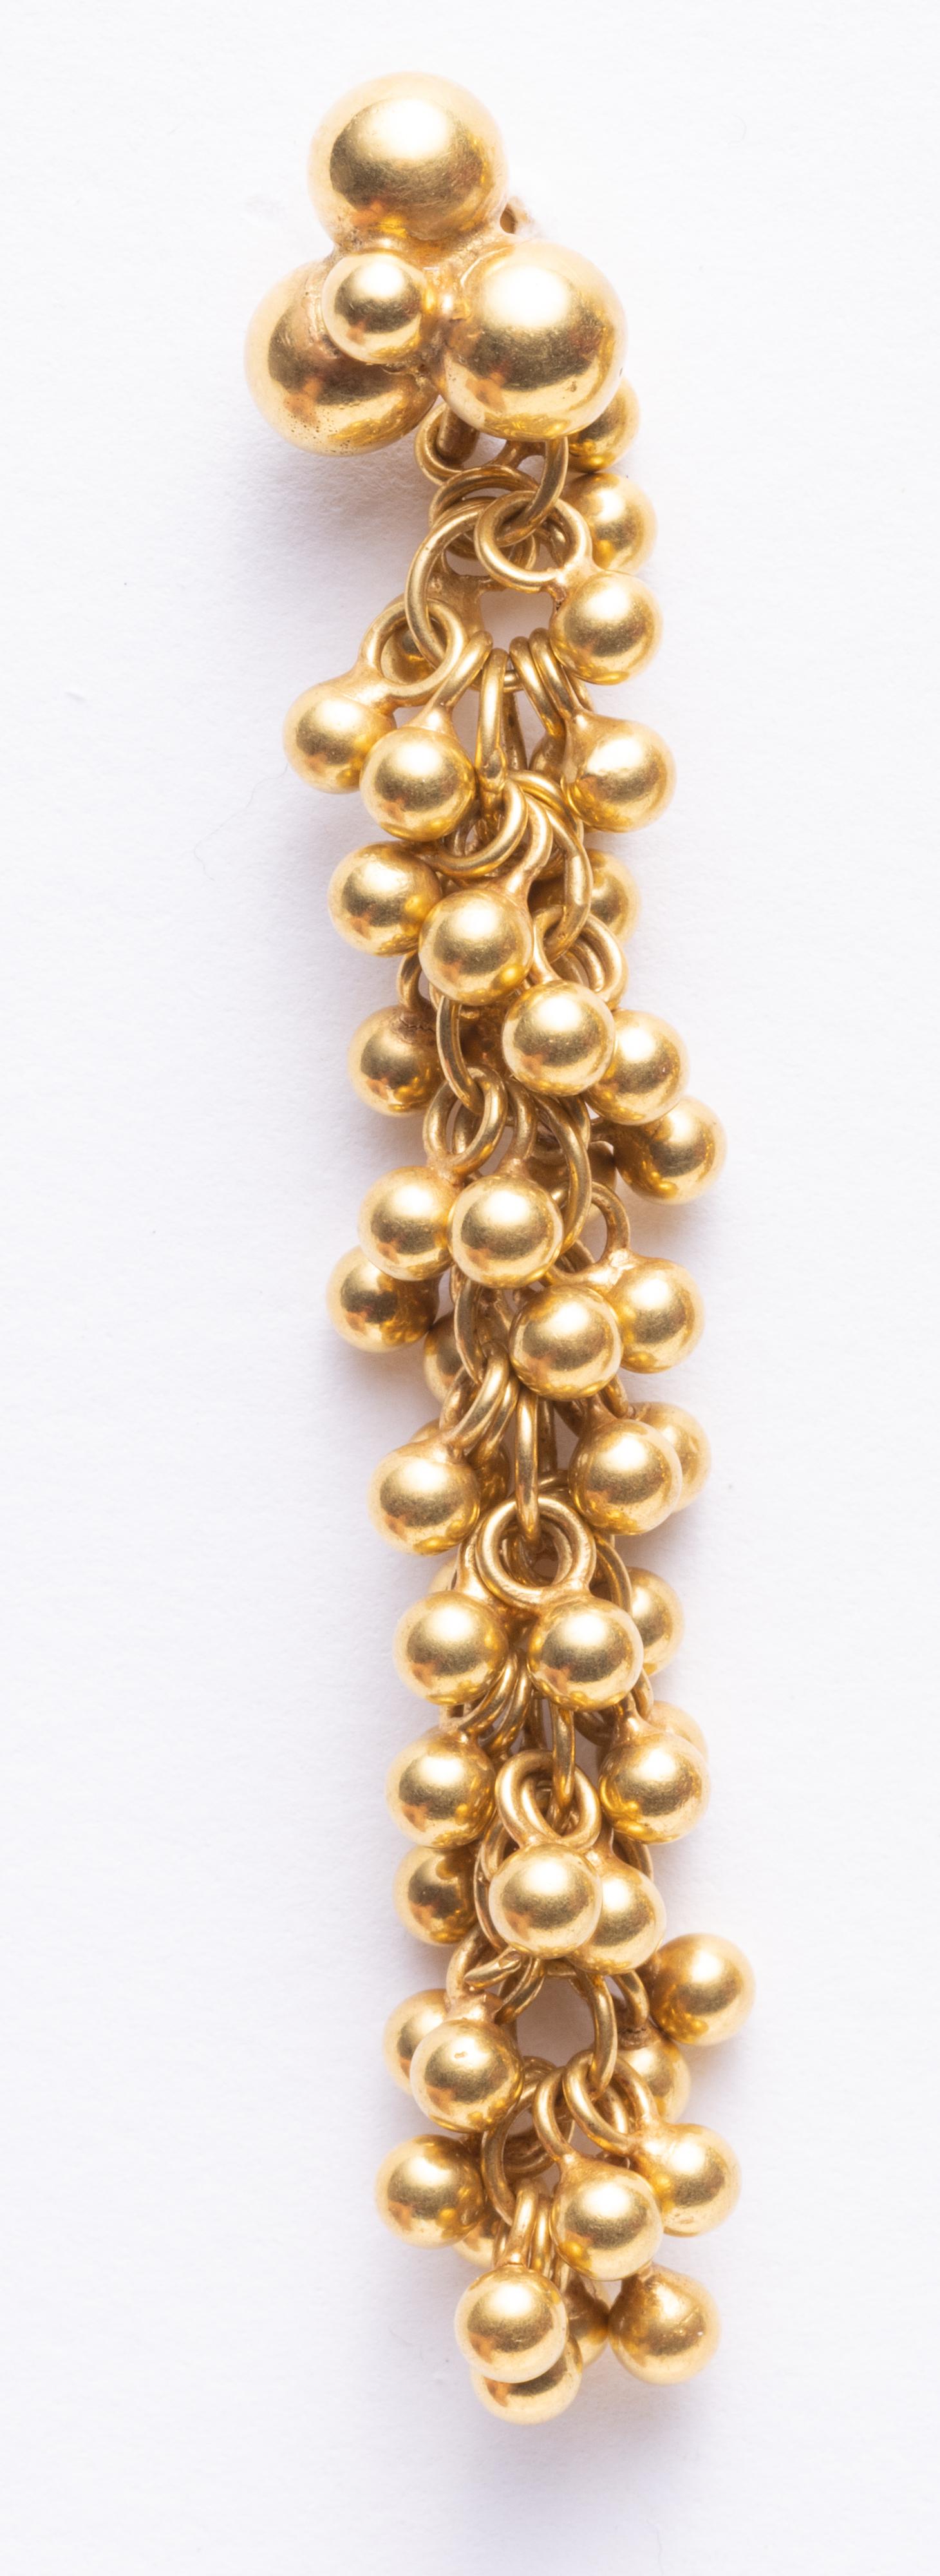 A pair of intricately beaded 18K gold balls woven onto a long chain, creating a textural long earring with movement.  Larger gold balls create the post at the lobe, for pierced ears.